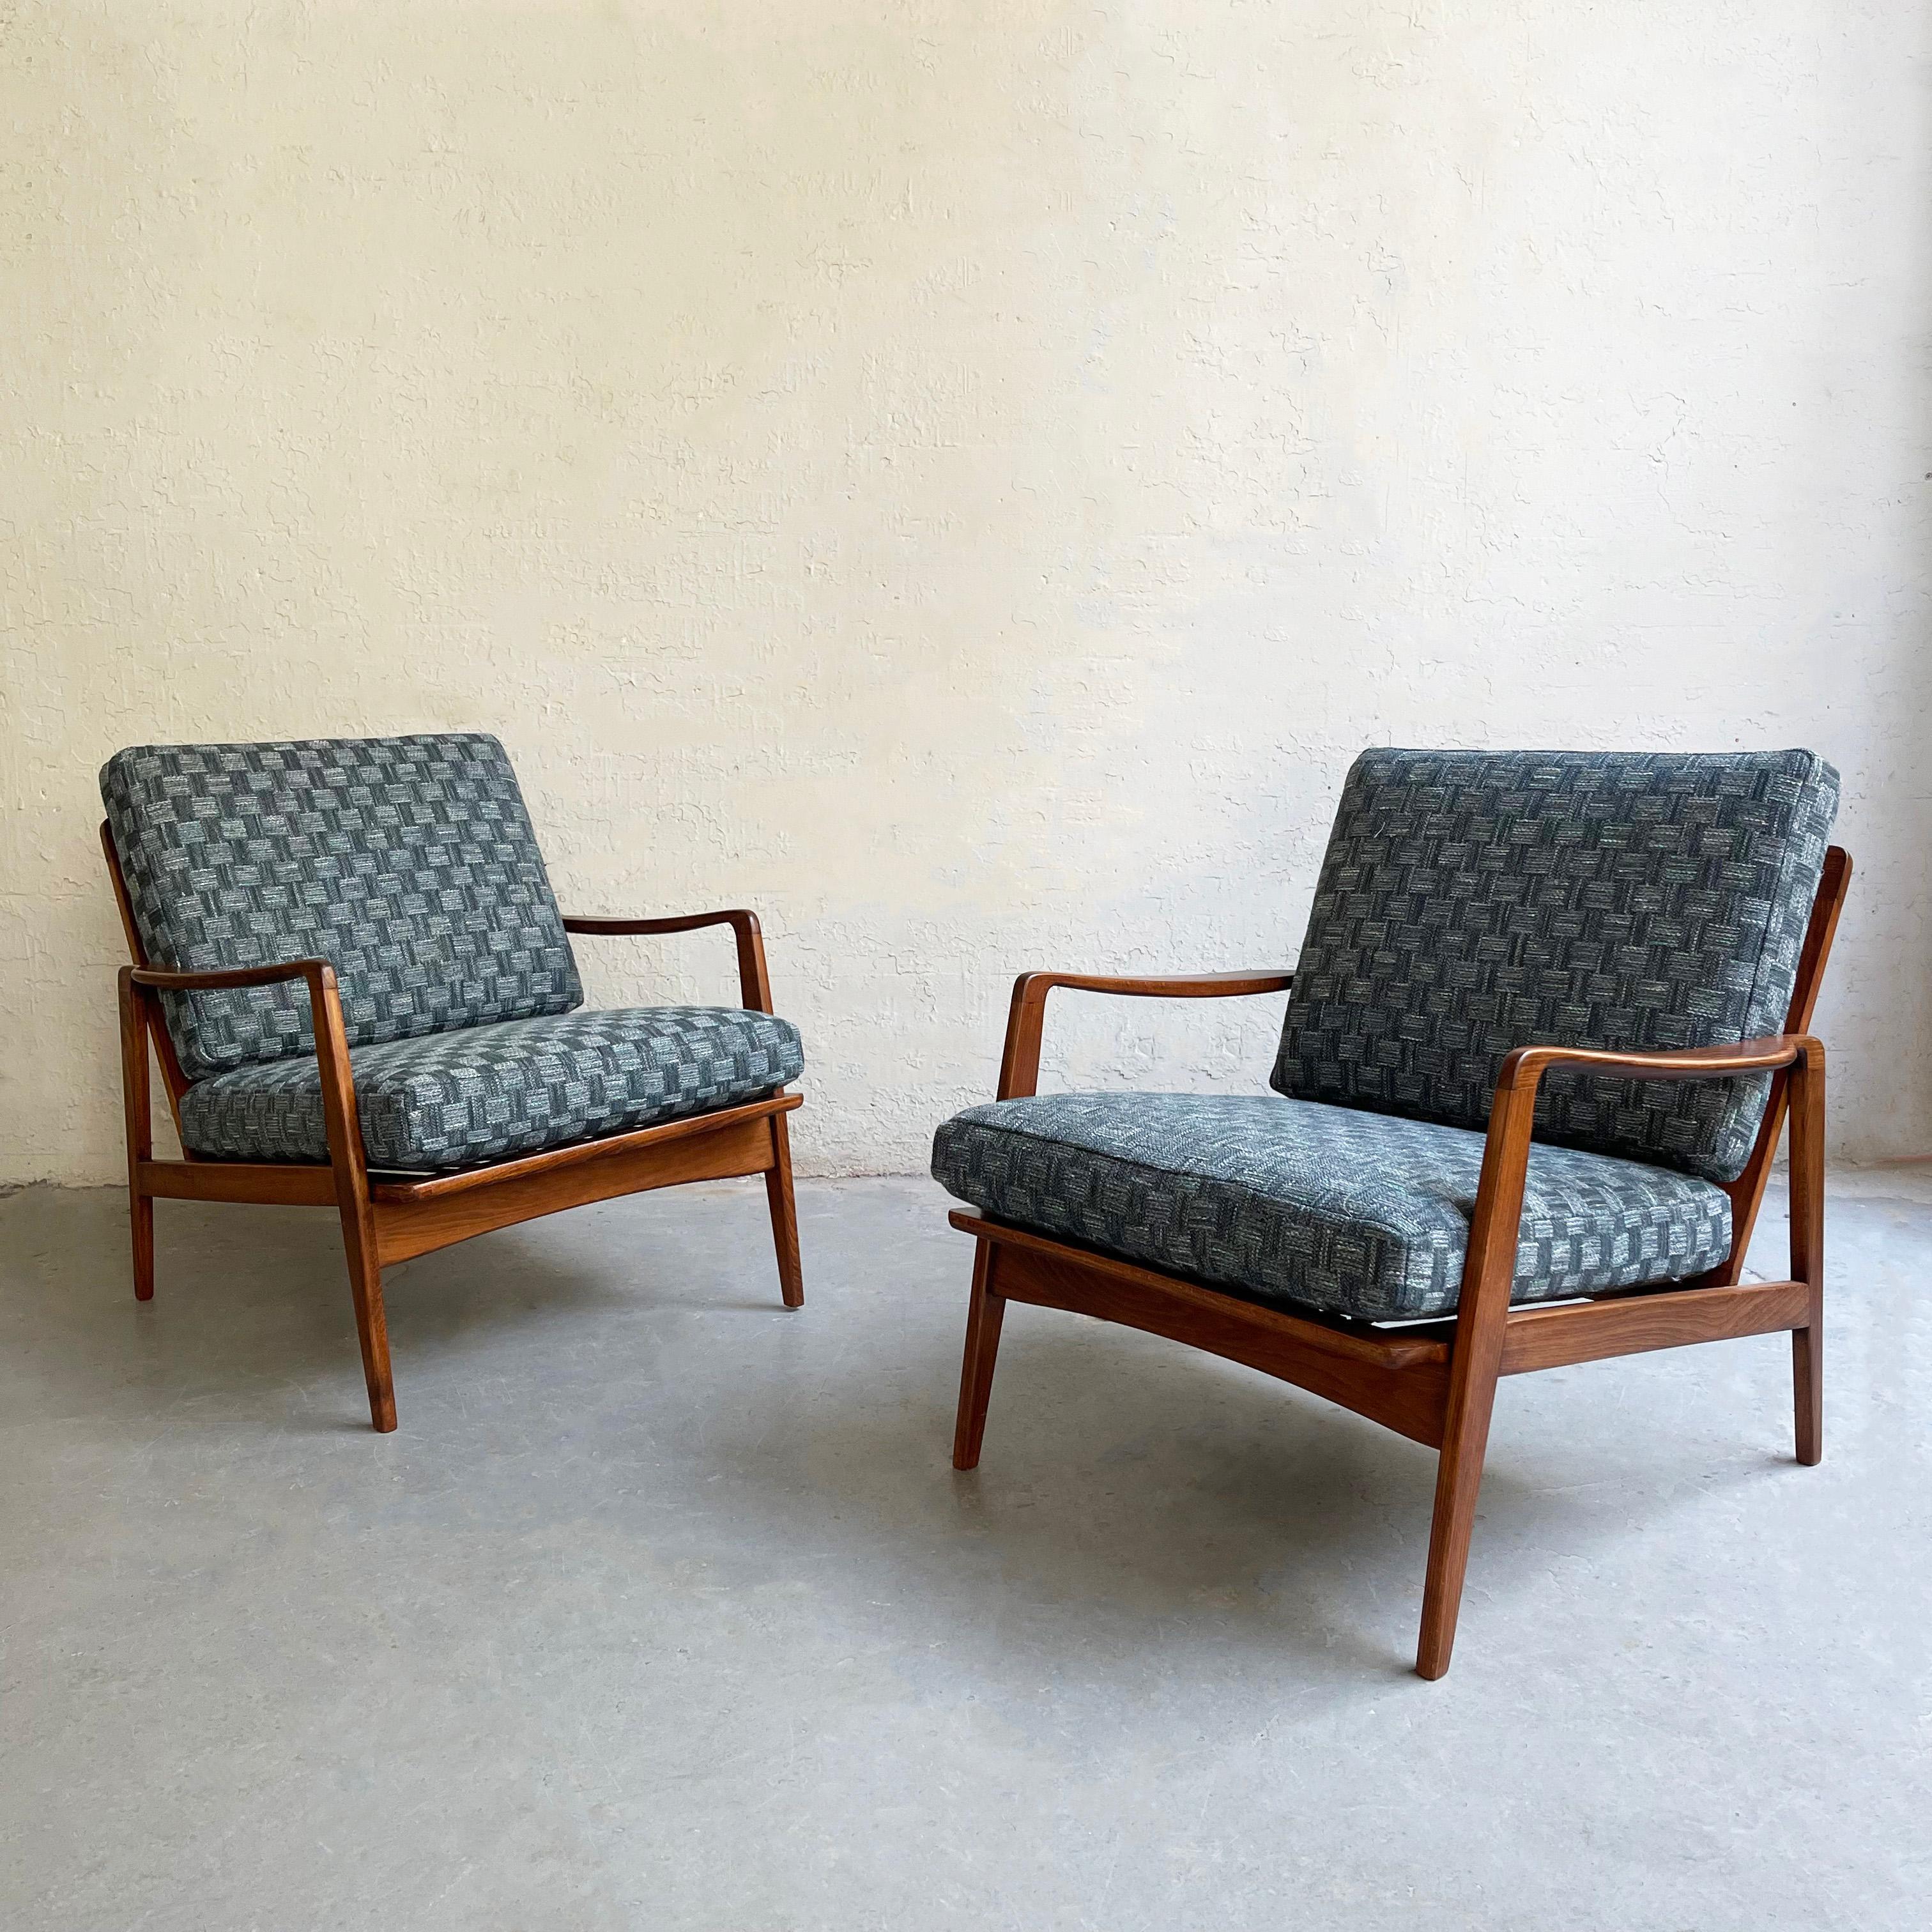 Lovely pair of classic, Scandinavian modern lounge chairs feature elegant, beech wood frames with newly upholstered seat and back cushions.